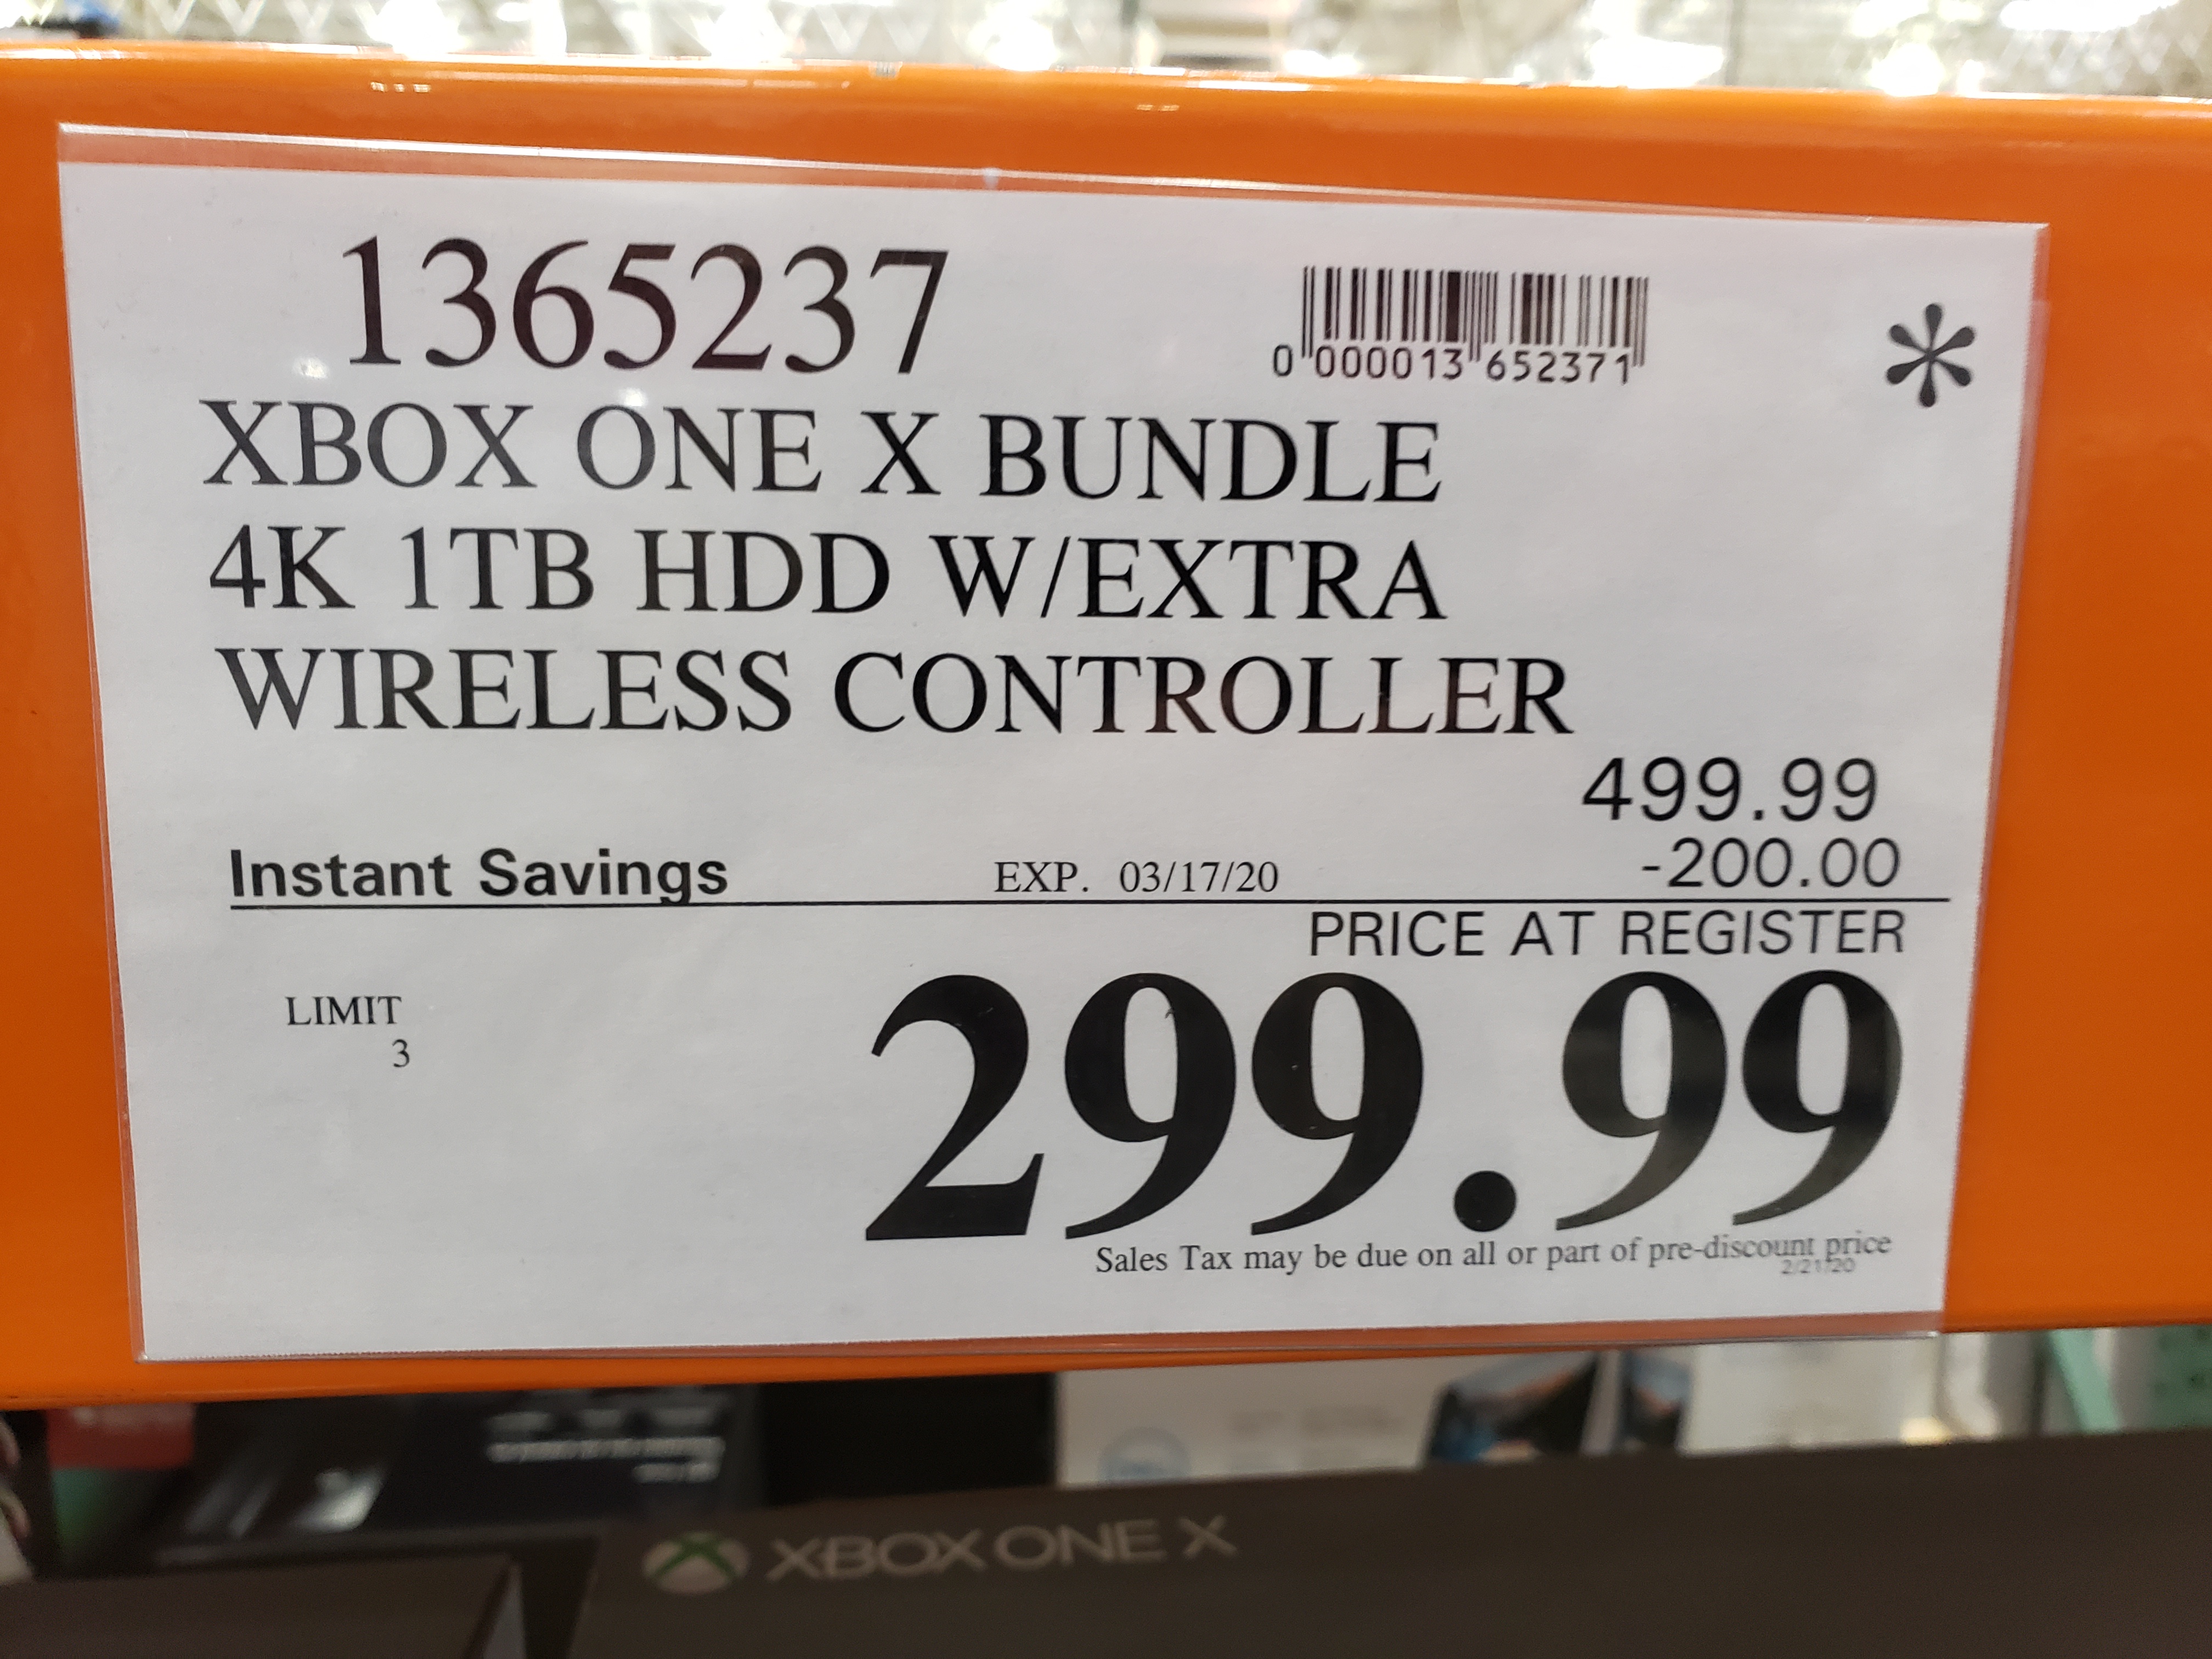 Xbox One X Bundle 4K 1TB HDD w/ Extra Wireless Controller COSTCO In-Store Only $299.99